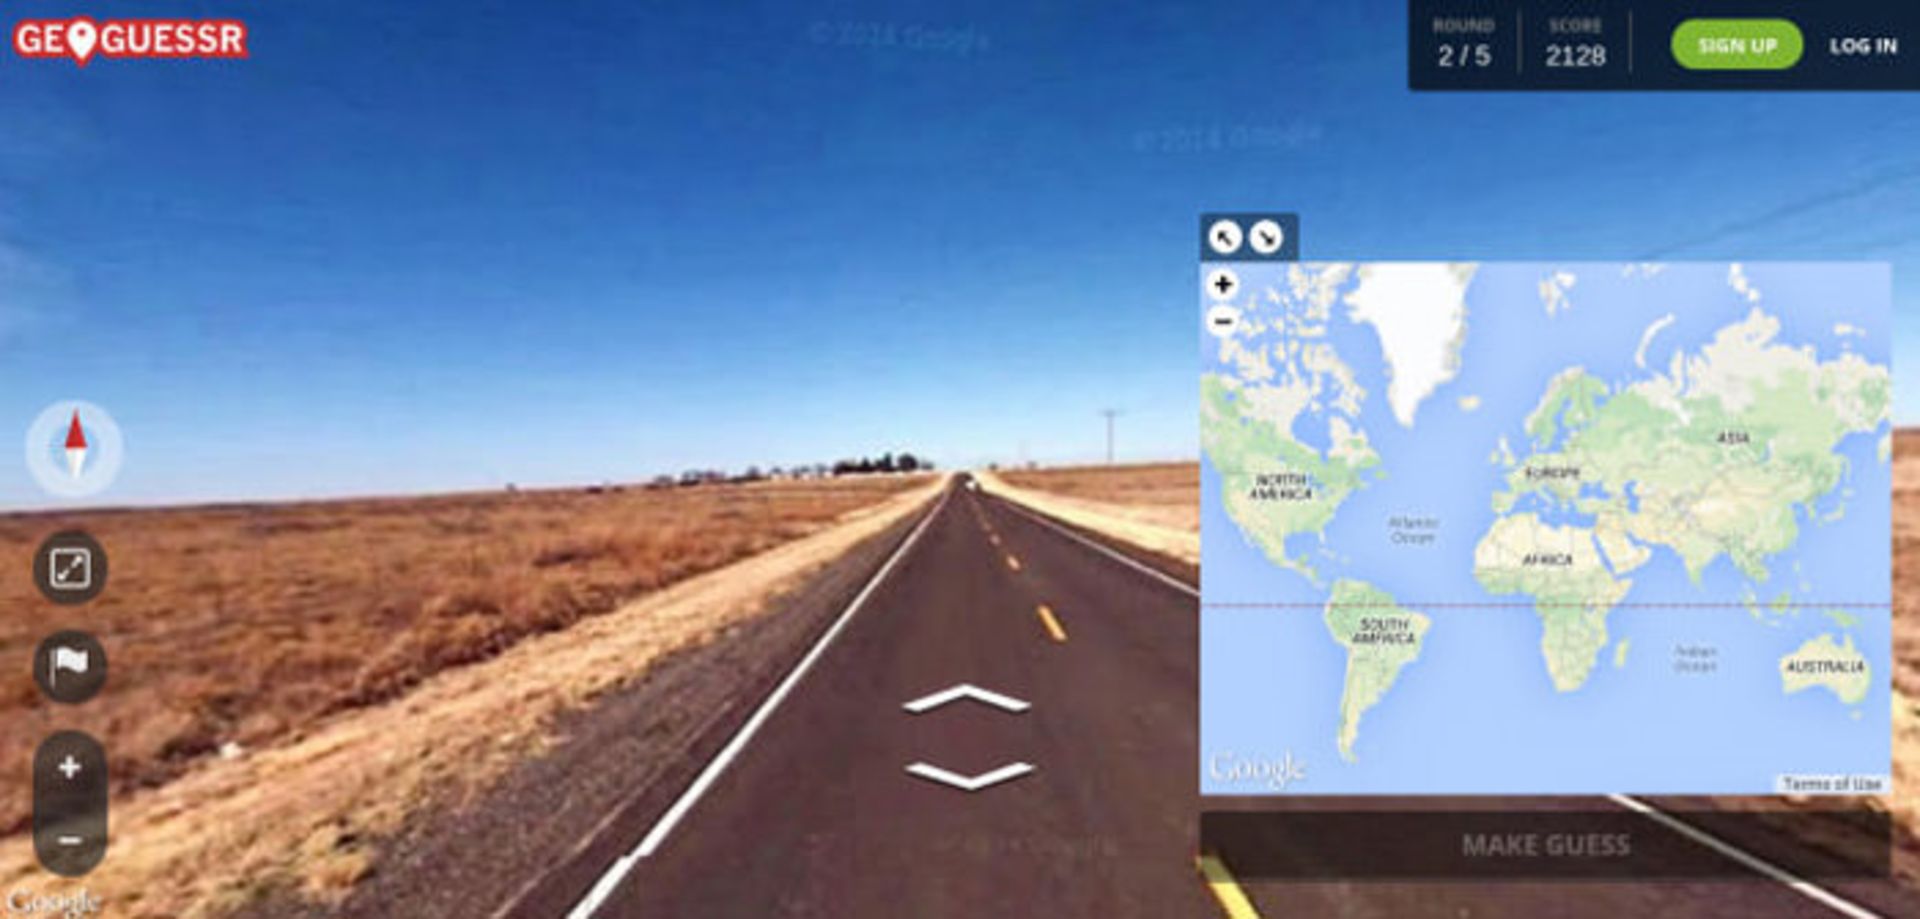 chrme-experiments-geoguessr